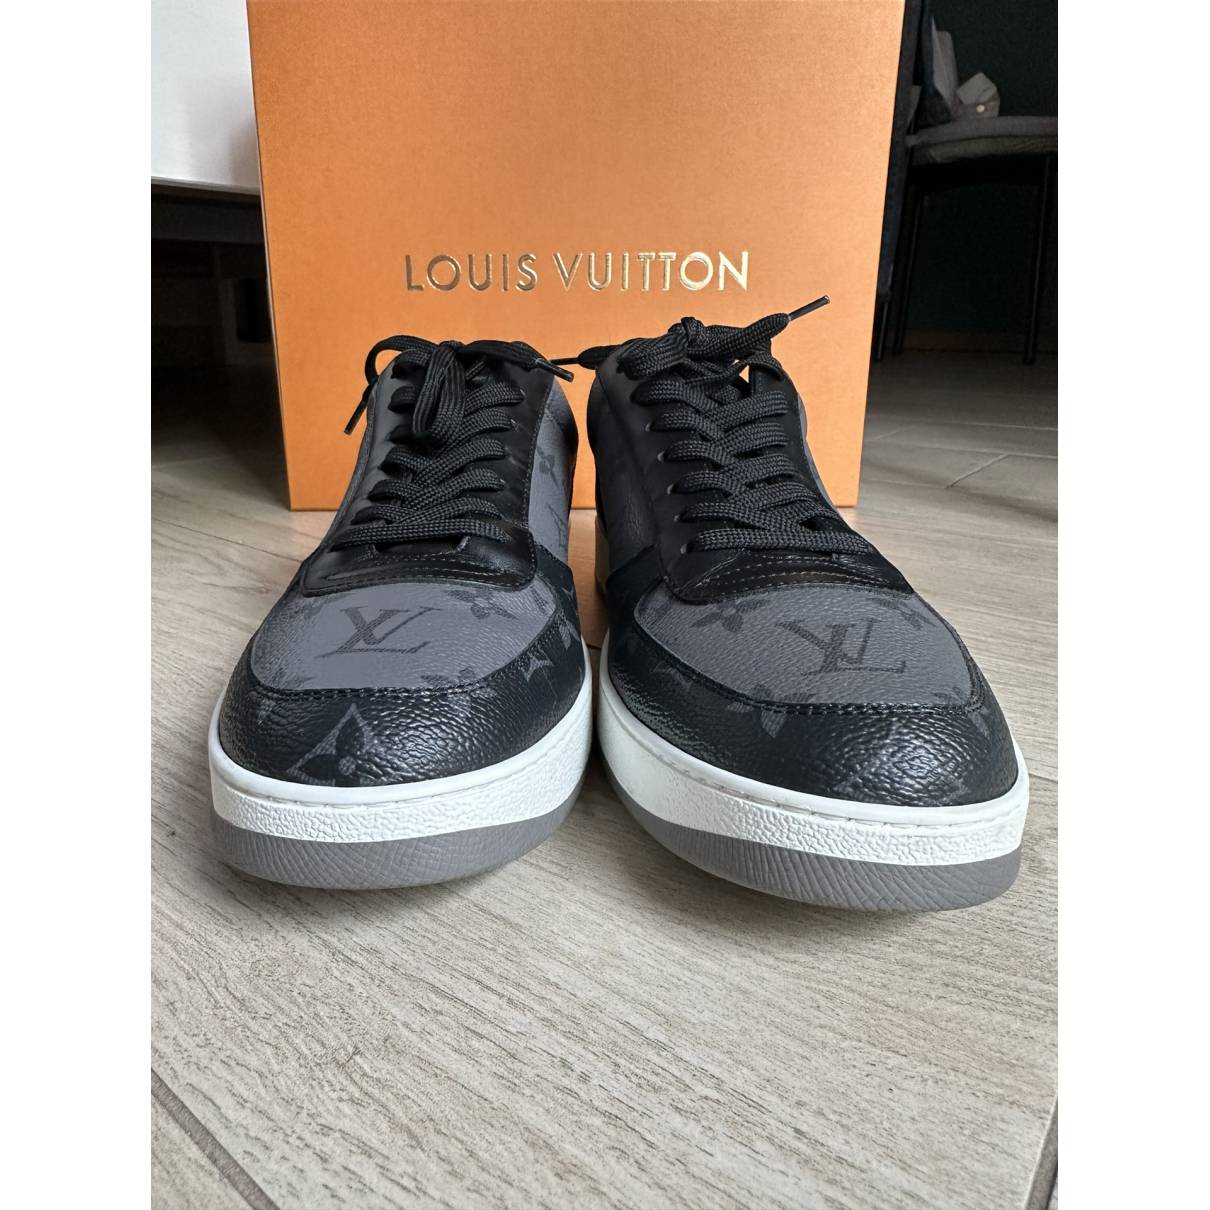 Lv trainer cloth low trainers Louis Vuitton Black size 42 EU in Cloth -  32243200